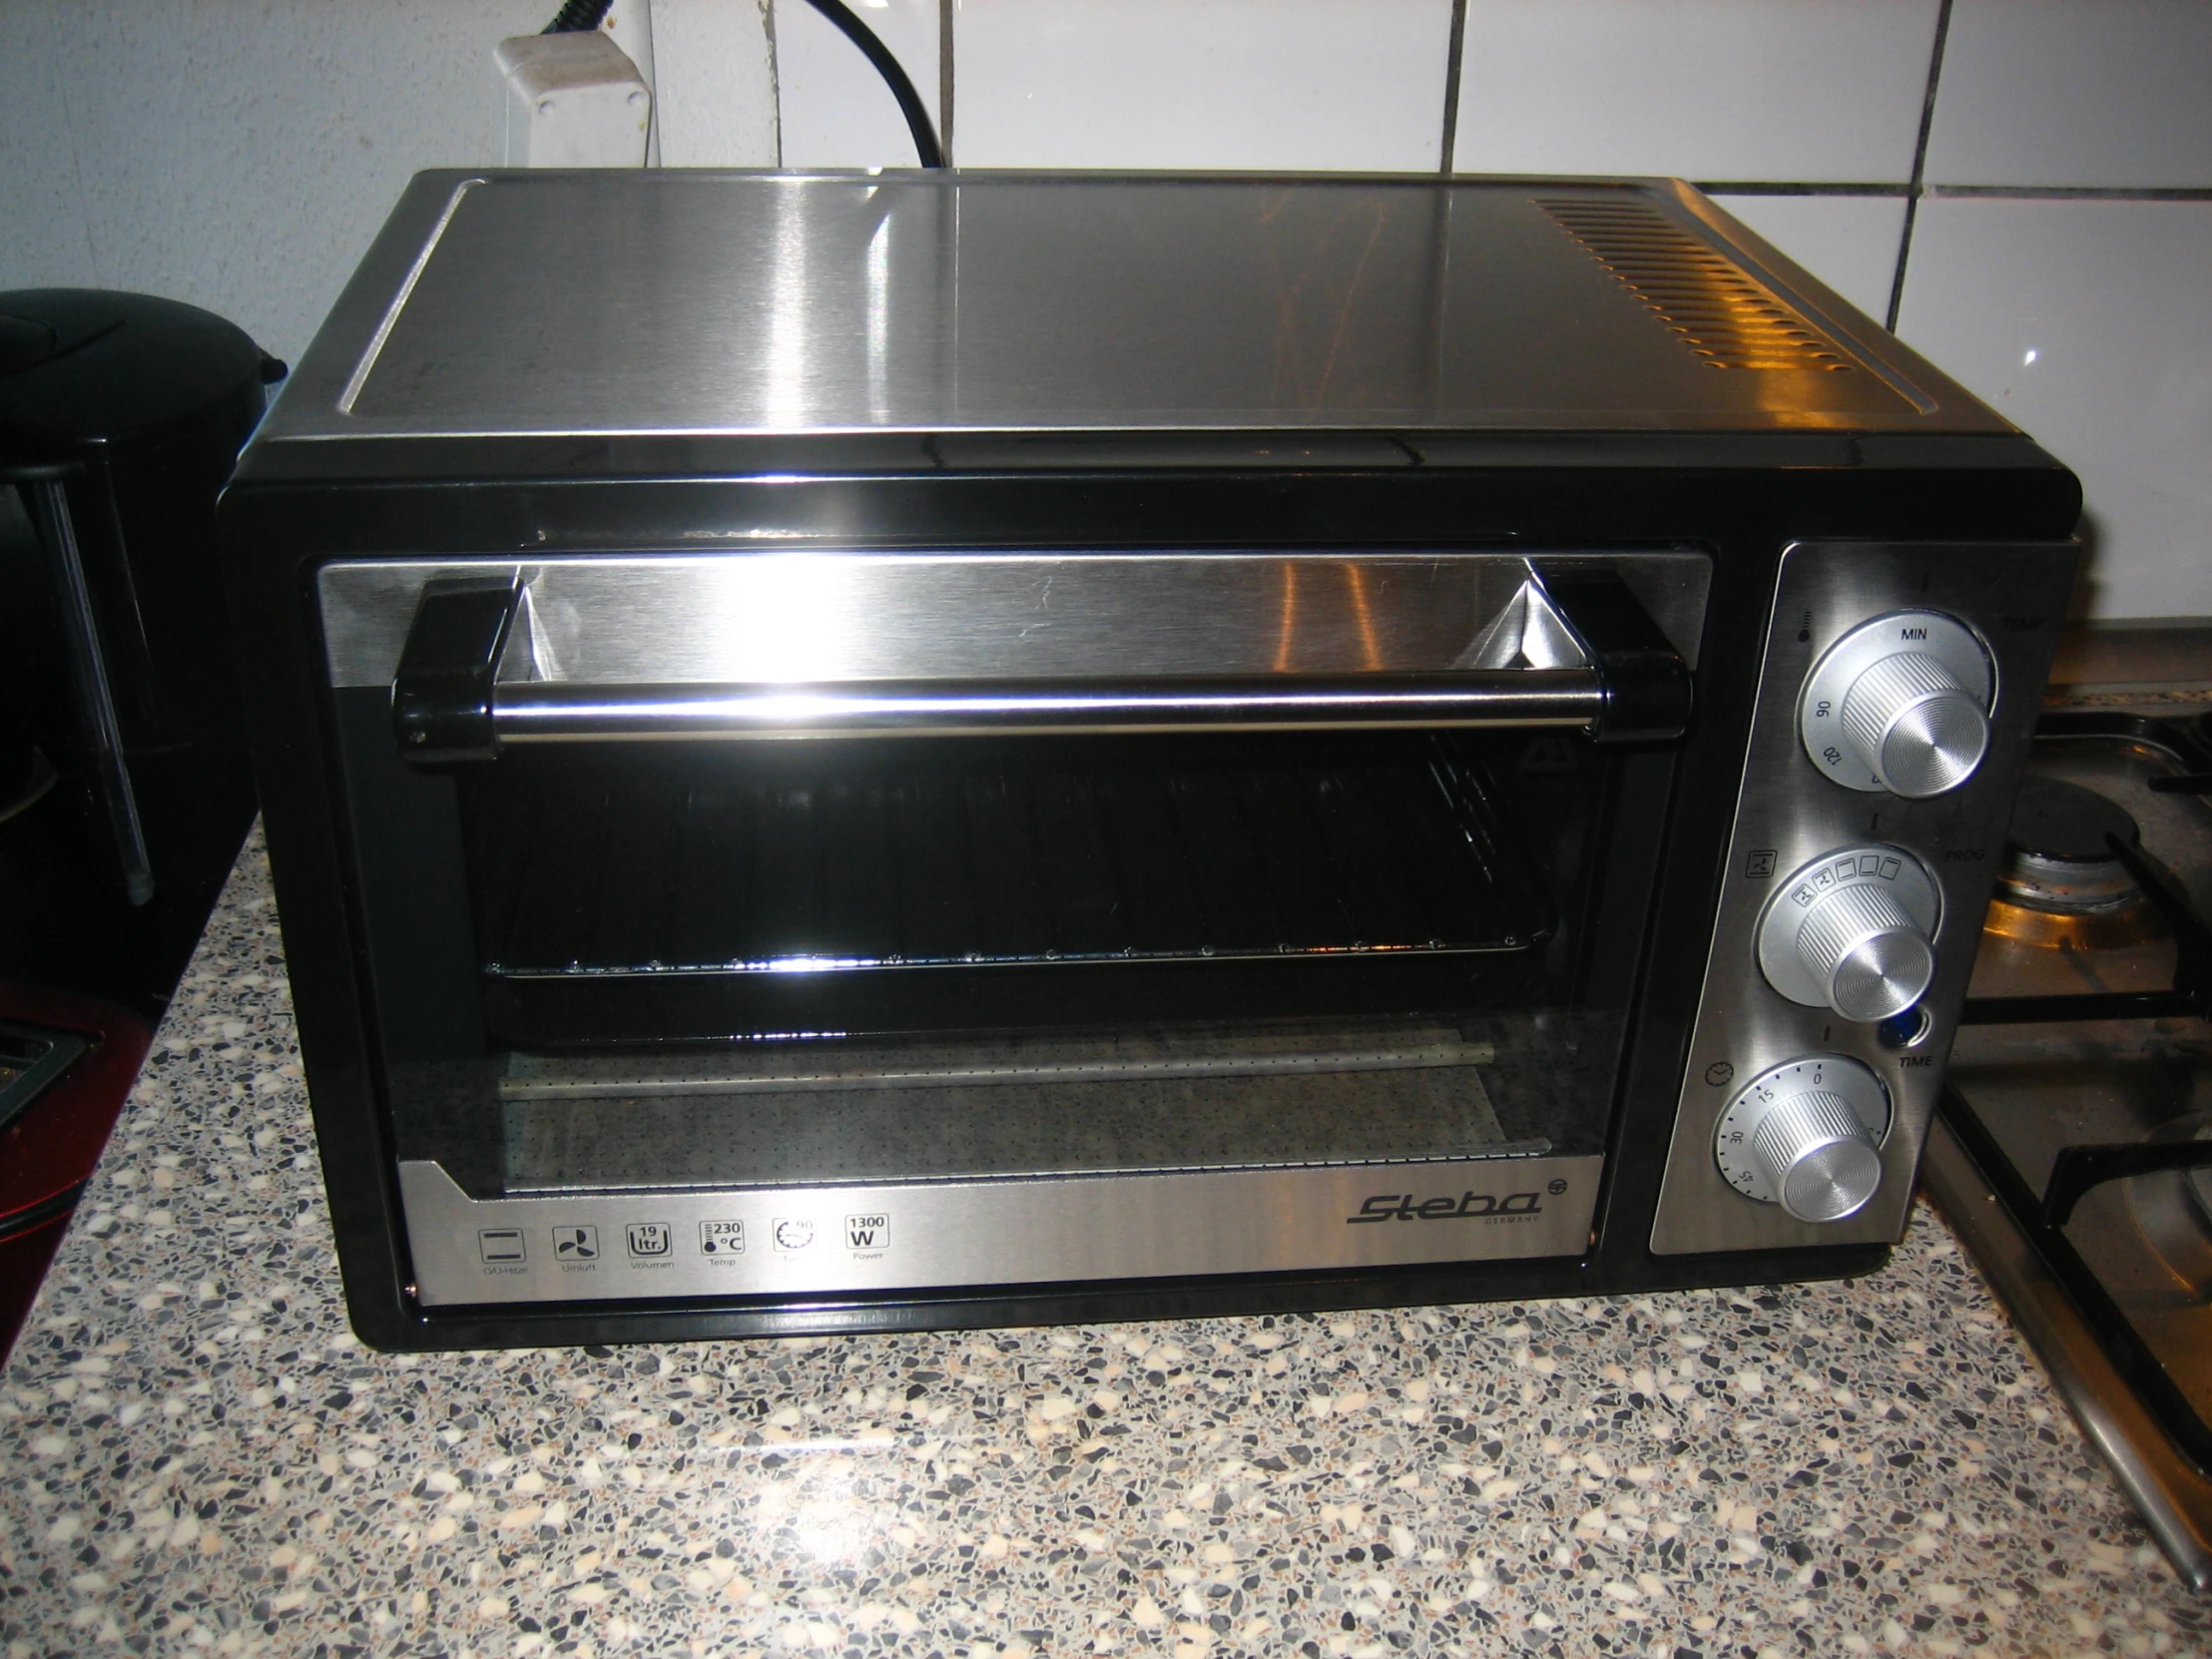 a toaster oven on the counter in the kitchen